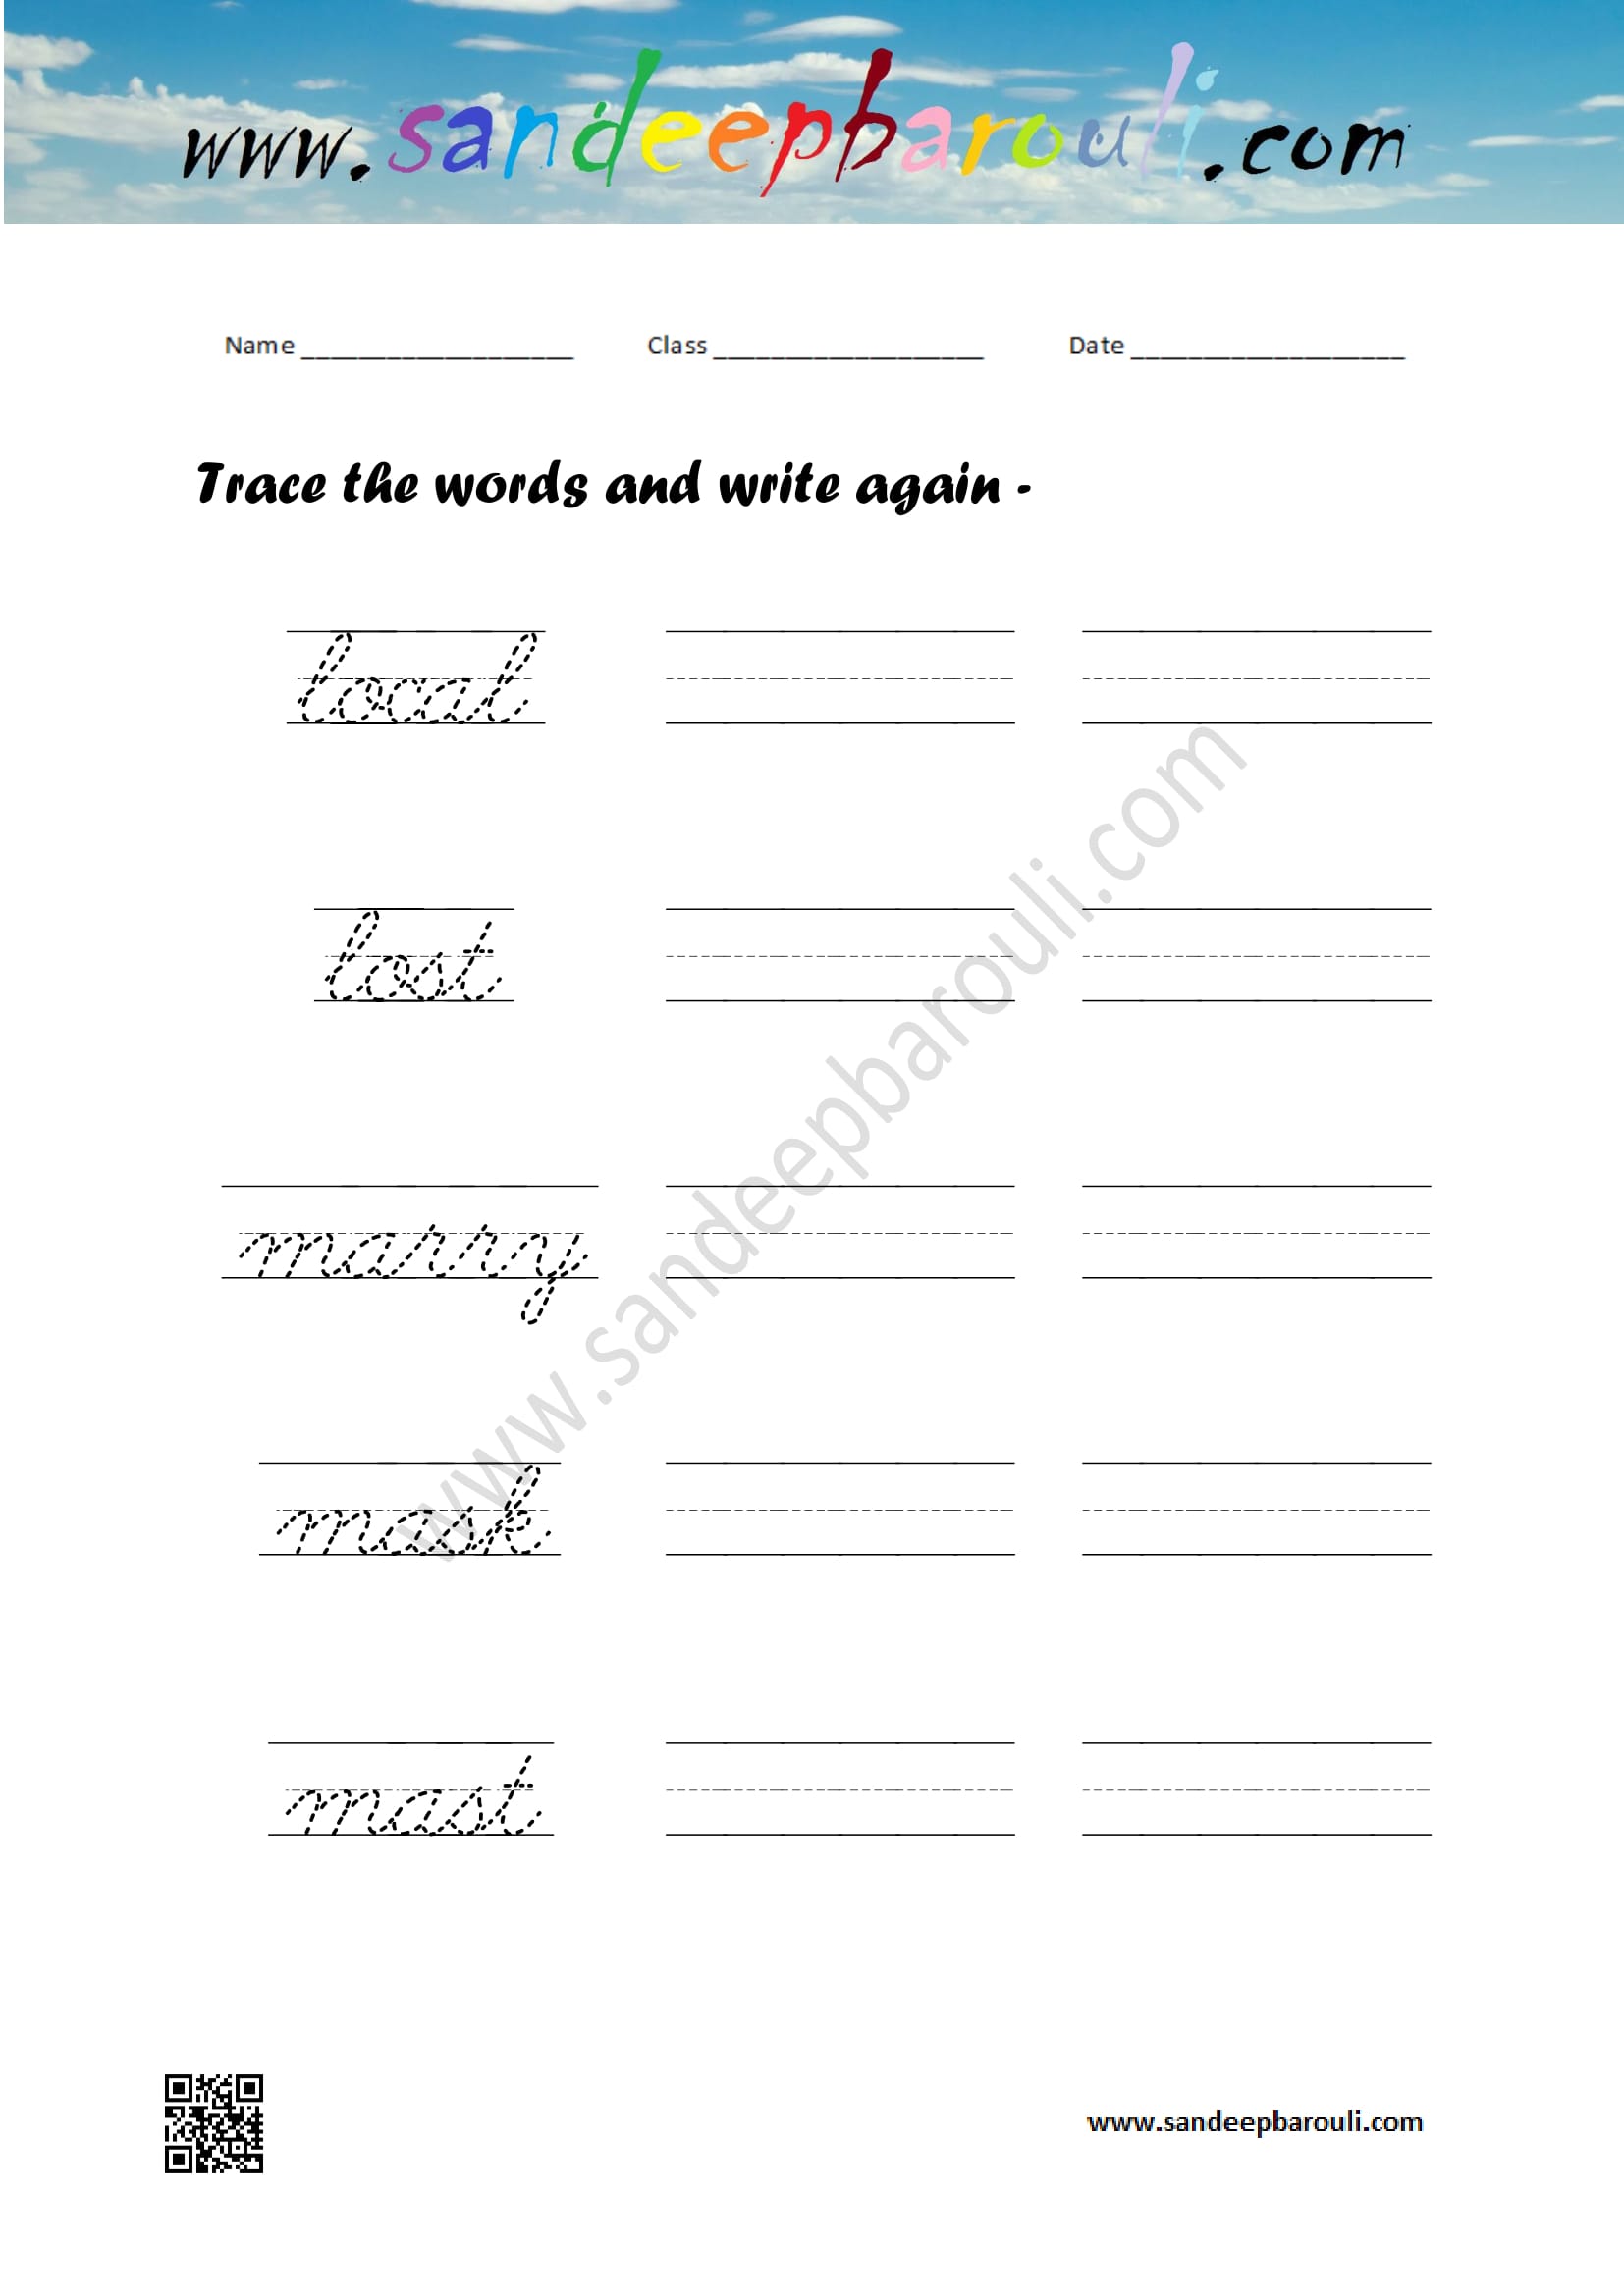 Cursive writing worksheet – trace the words and write again (49)